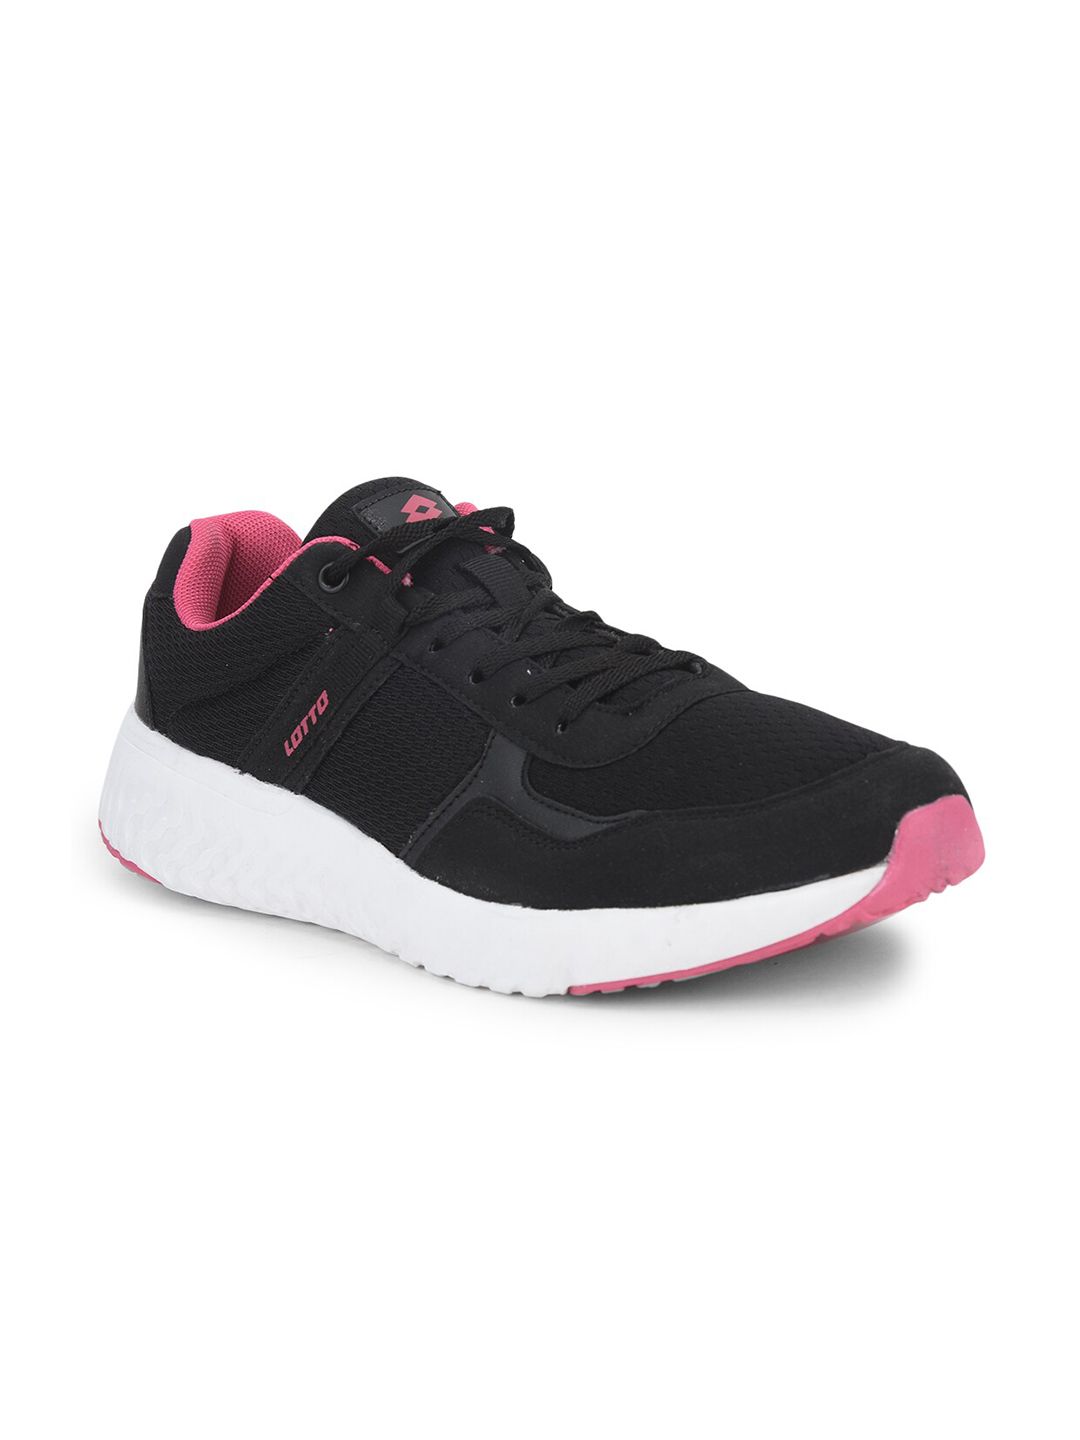 Lotto Women Black Mesh Running Shoes Price in India